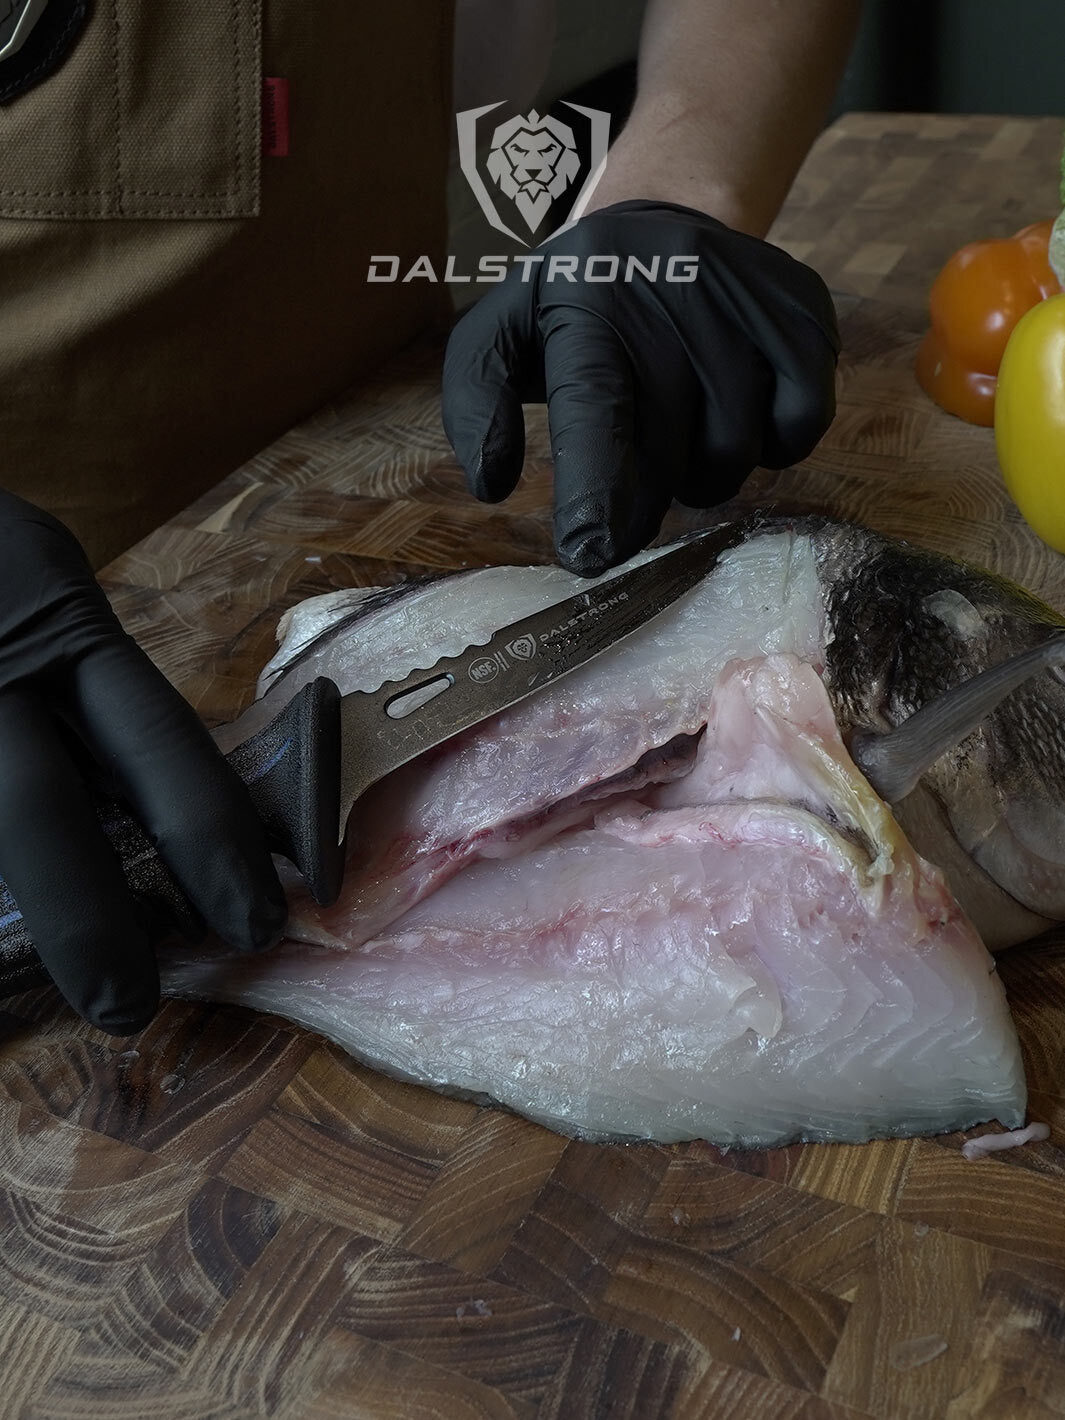 Dalstrong night shark series 4.7 inch fillet knife with water proof handle with a fillet fish on a cutting board.